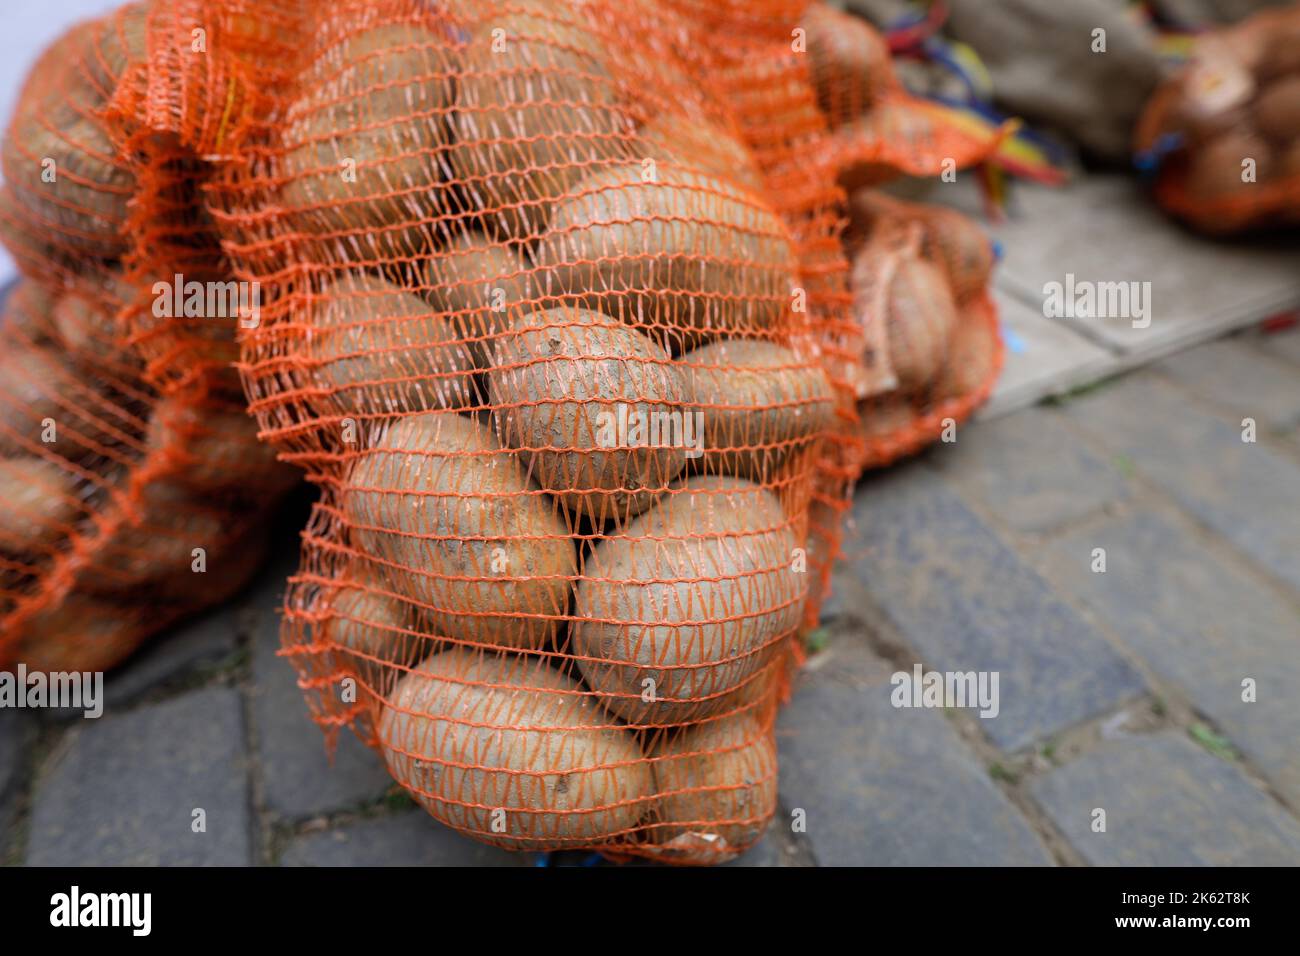 Shallow depth of field (selective focus) details with potatoes in a net sack in an european farmers market. Stock Photo